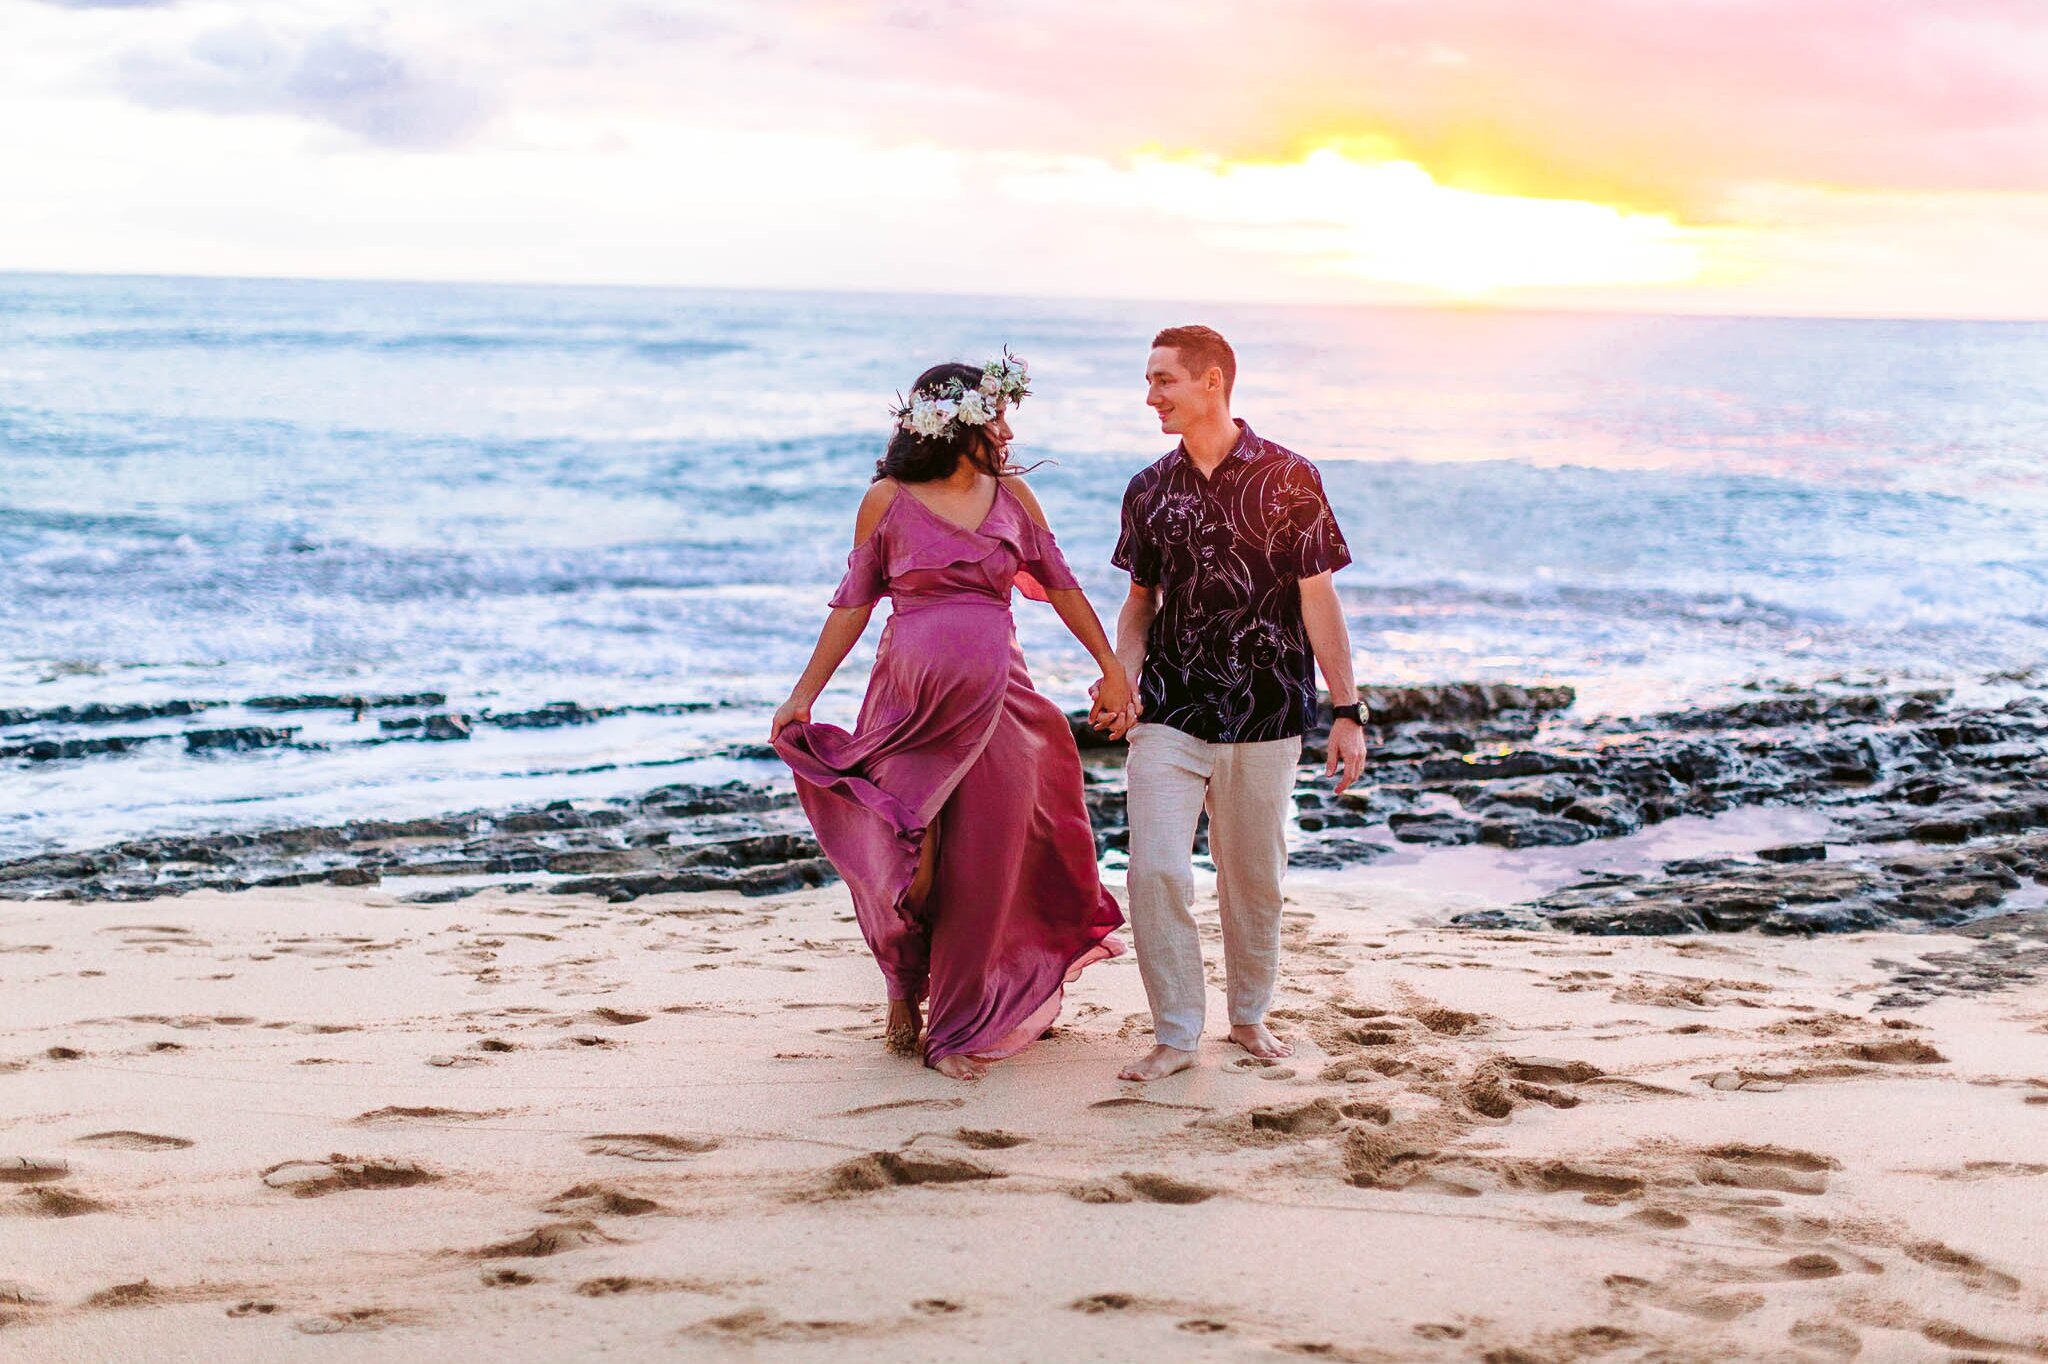 Ruth - Maternity Photography Session at Maili Beach Park, West side oahu - hawaii family photographer 18.jpg